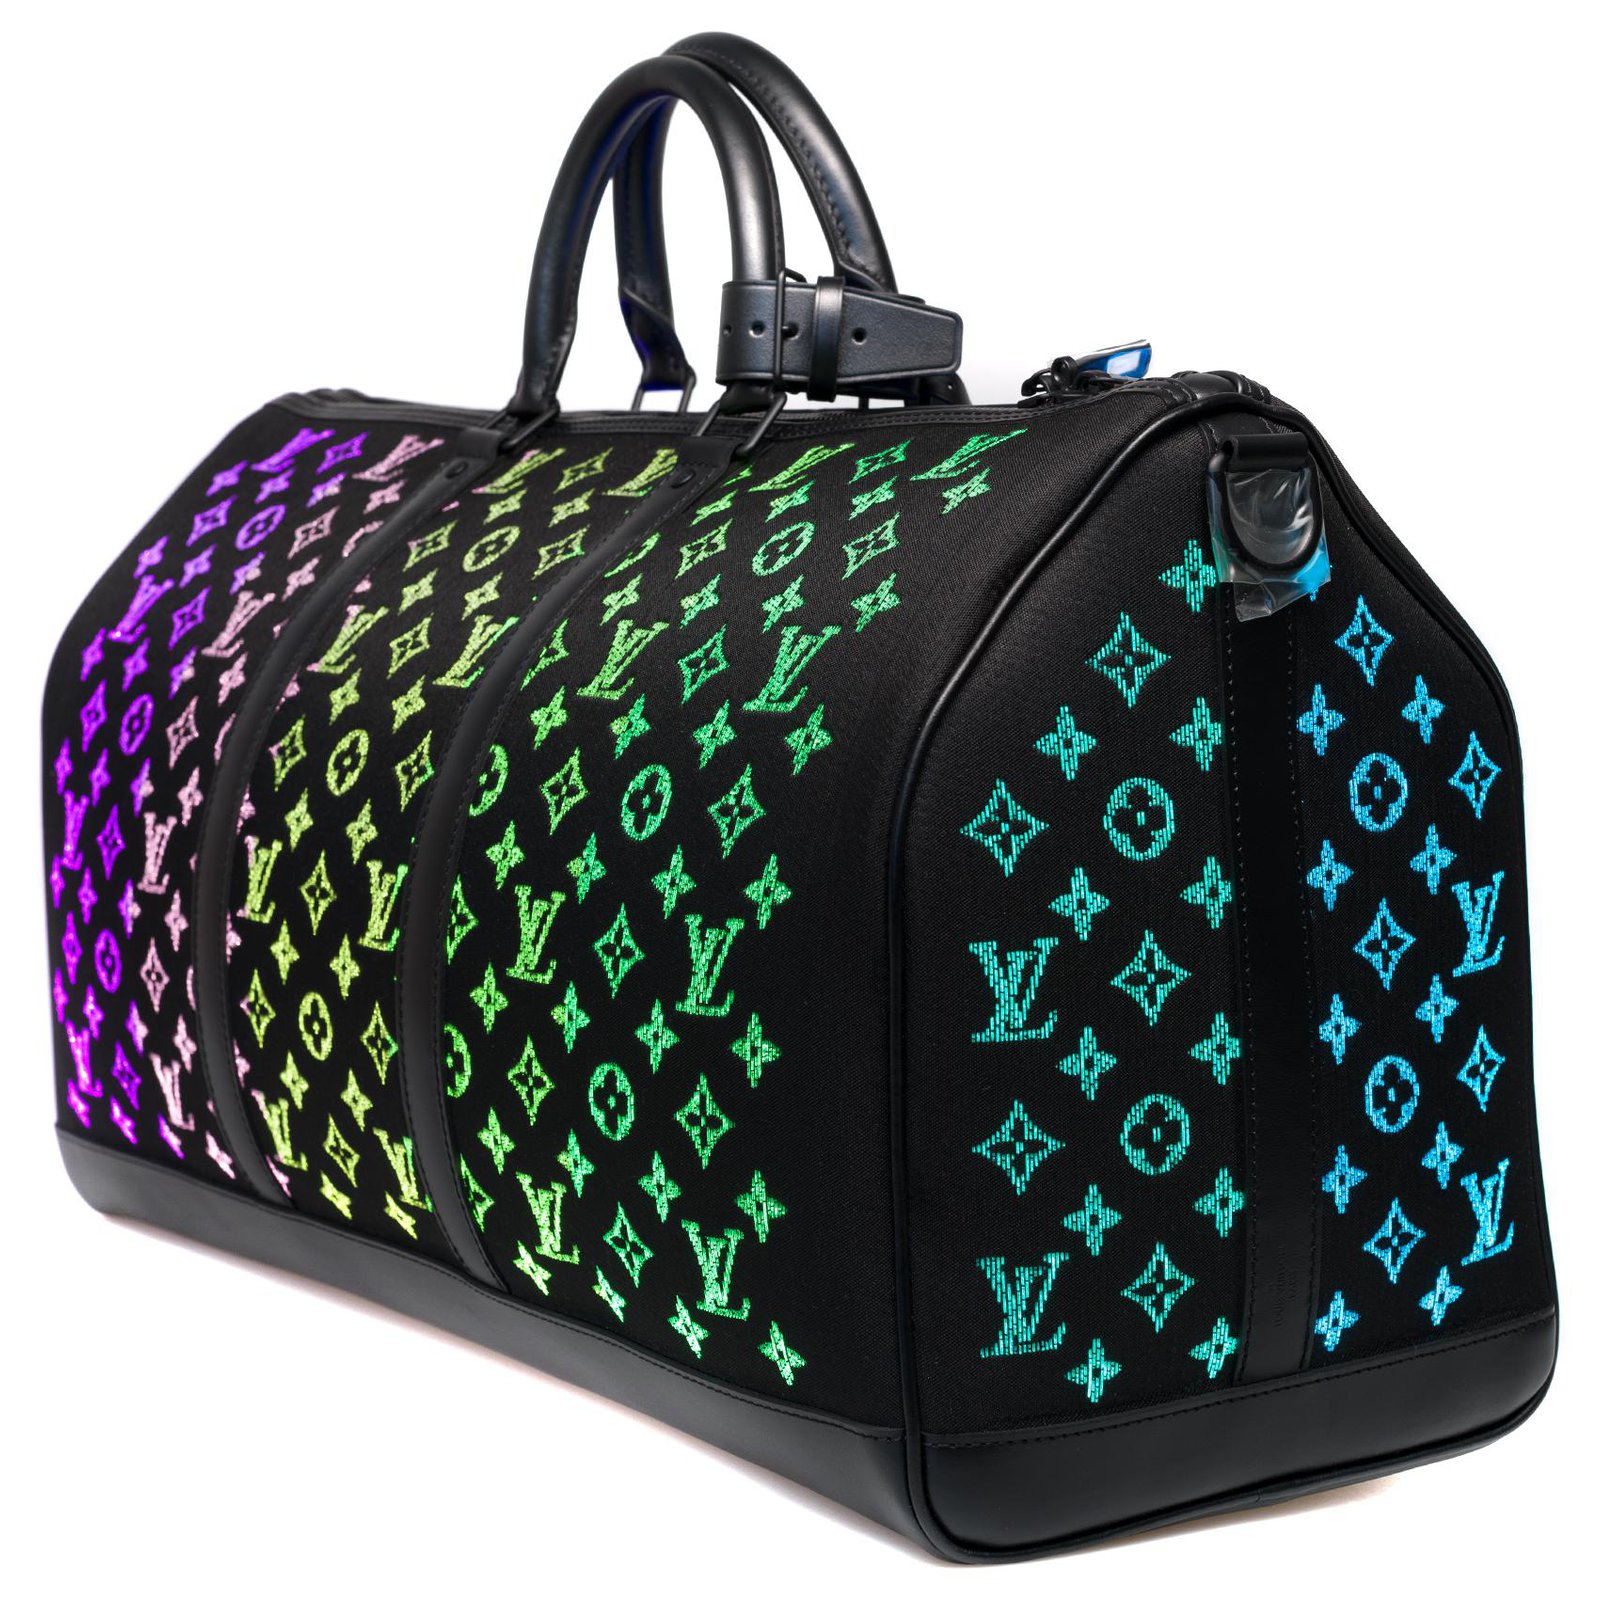 SAINT on X: Light-Up Louis Vuitton Keepall What do we think of